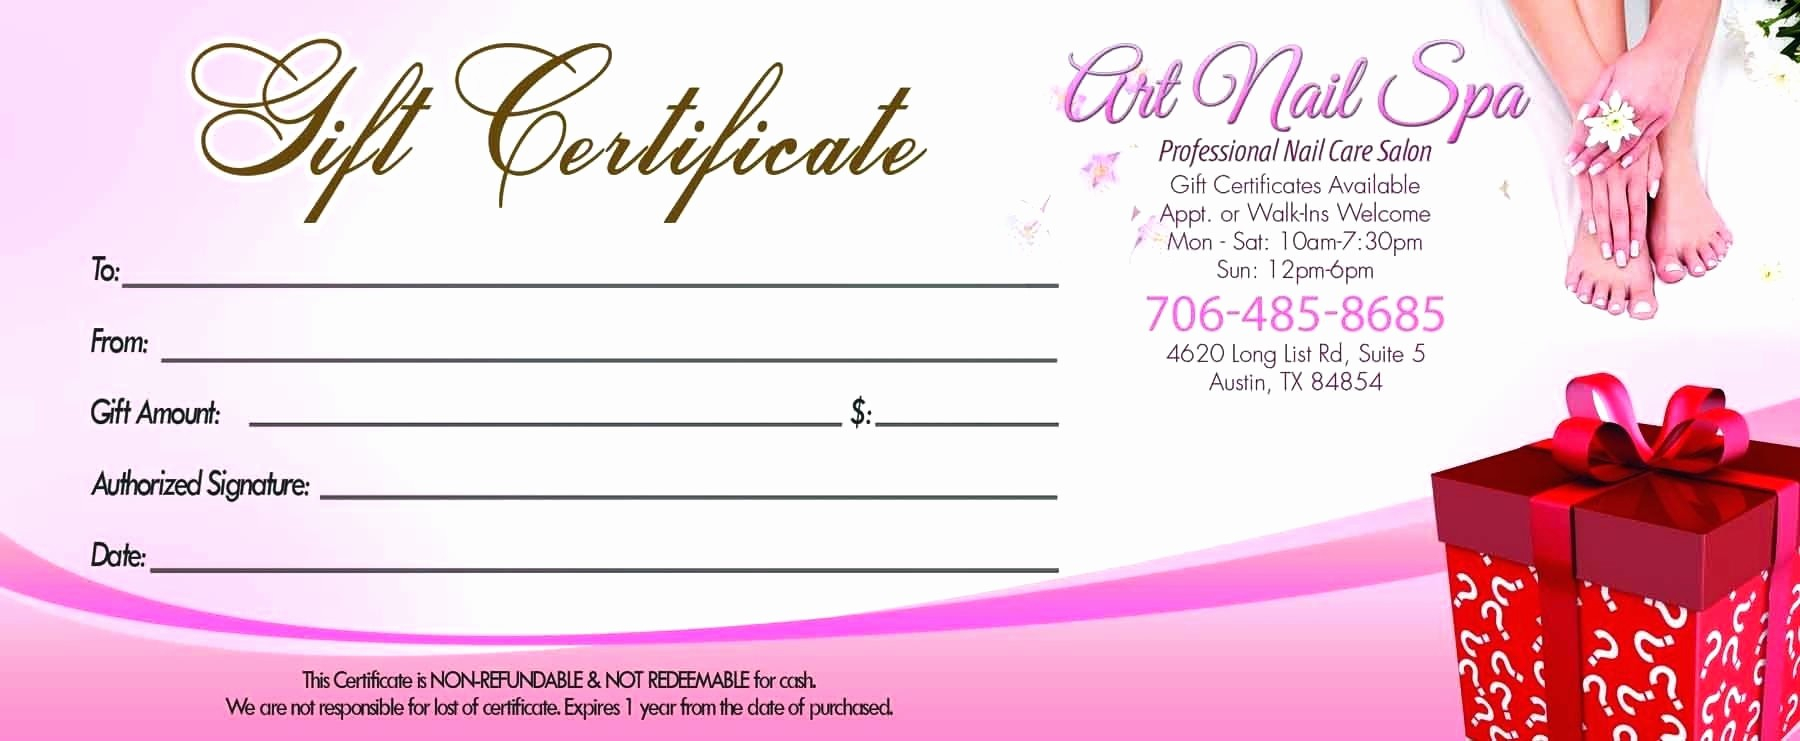 Amazing Salon Gift Certificate Template Ideas Free Hair Word Pertaining To Salon Gift Certificate Template